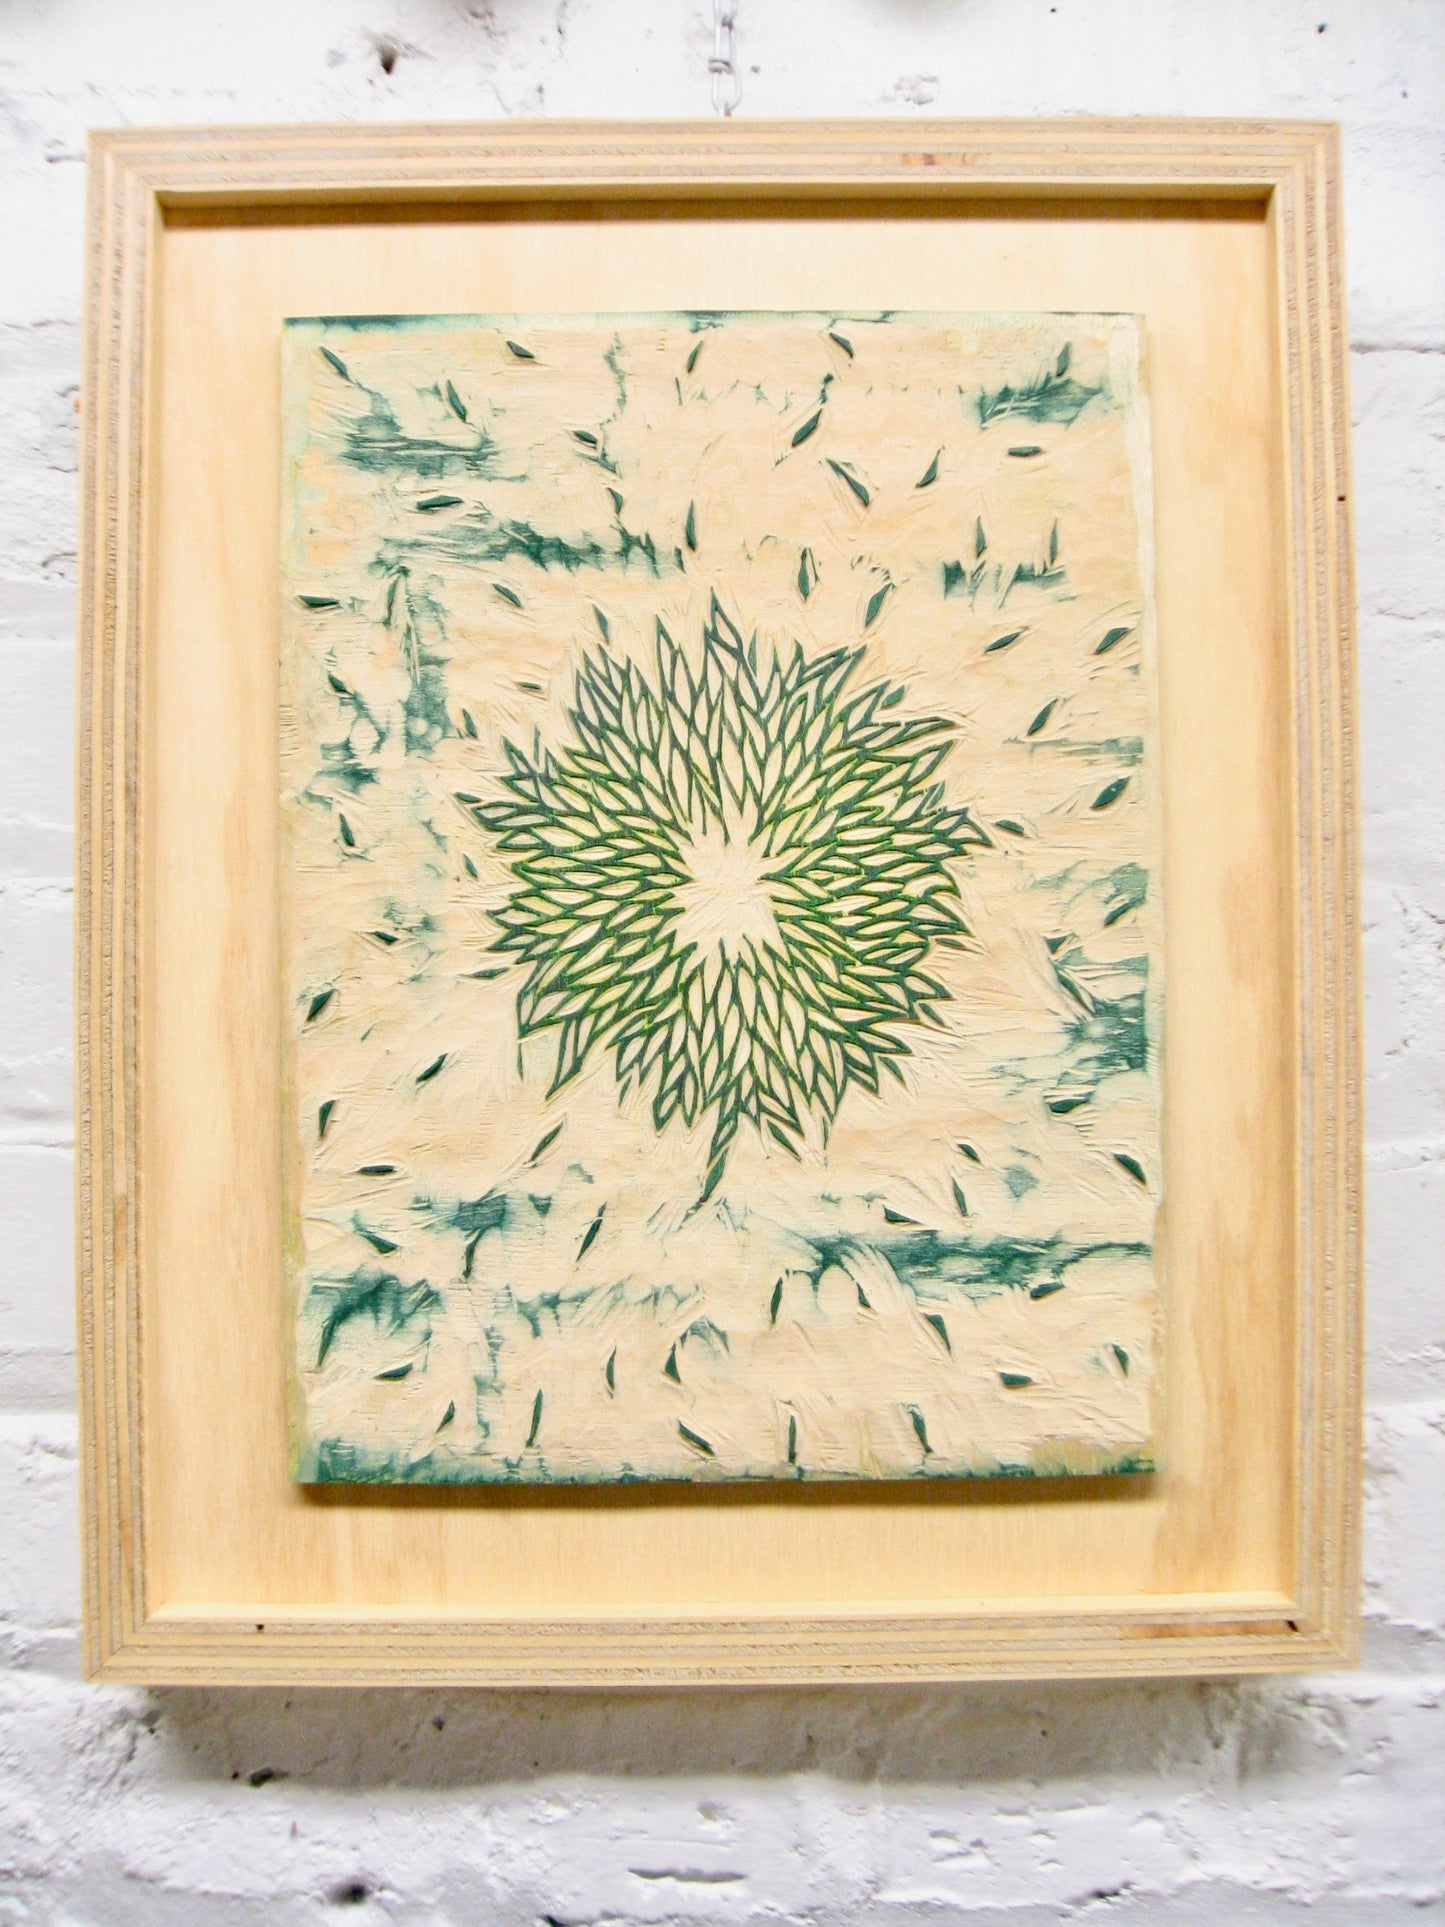 Surround Me FRAMED WOODBLOCK - hand carved original printers block with metal framed print - collector's item